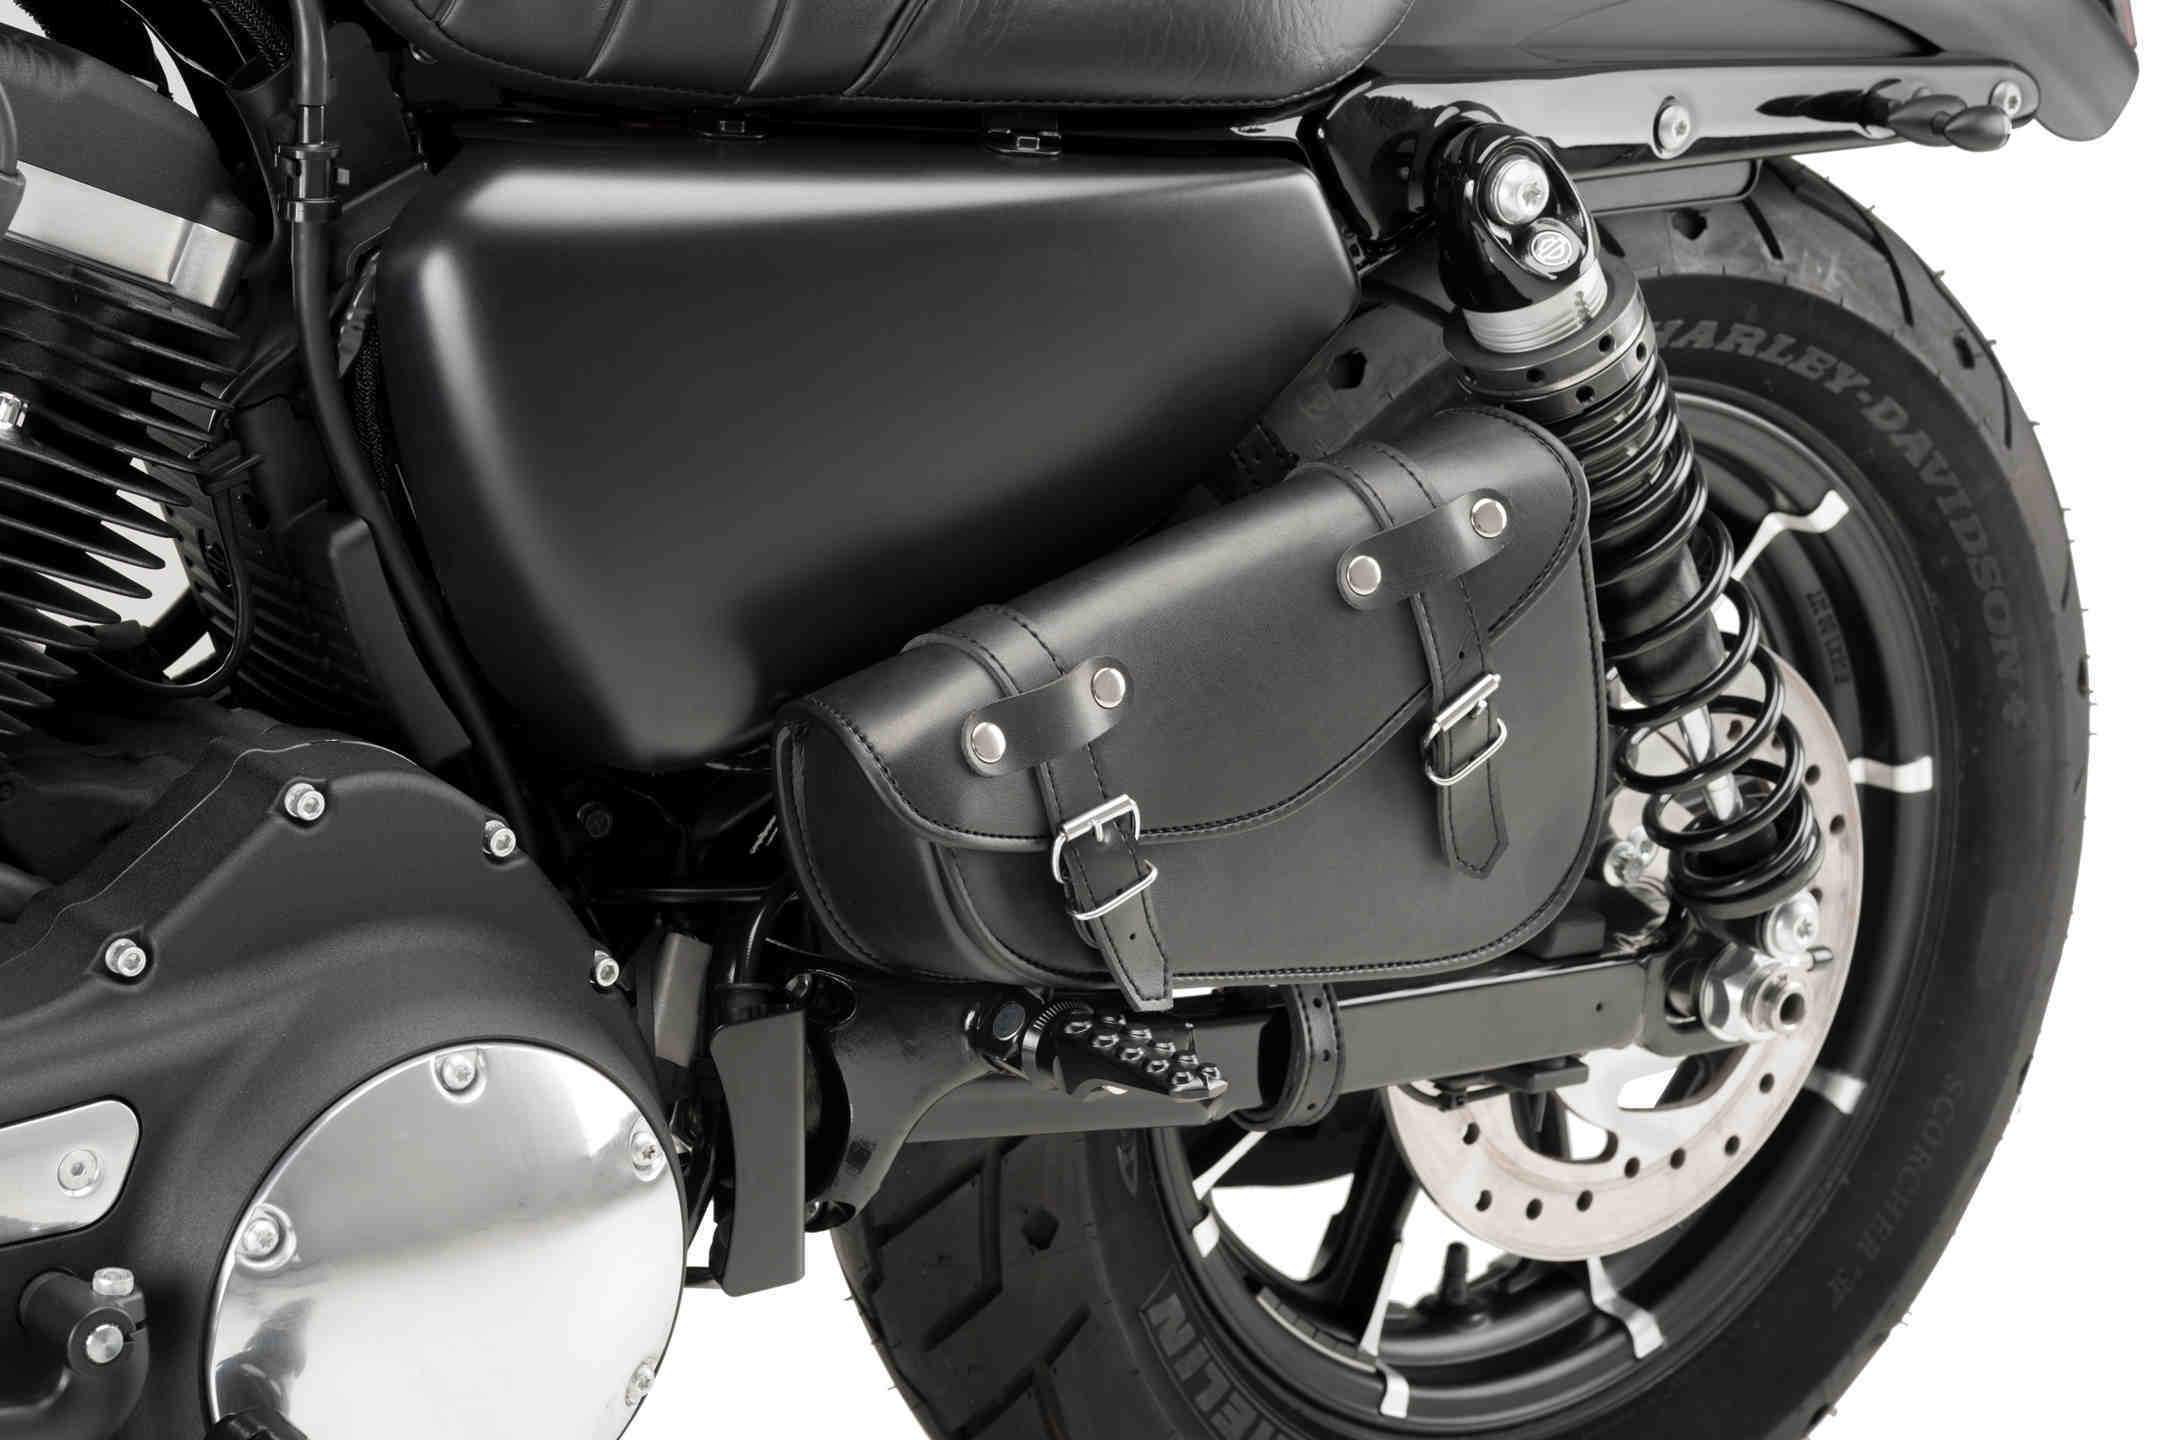 Customacces Detroit Left Saddlebag No Support Included | Black | Honda VTX 1300 R 2002>2010-XAP0003N-Storage-Pyramid Motorcycle Accessories